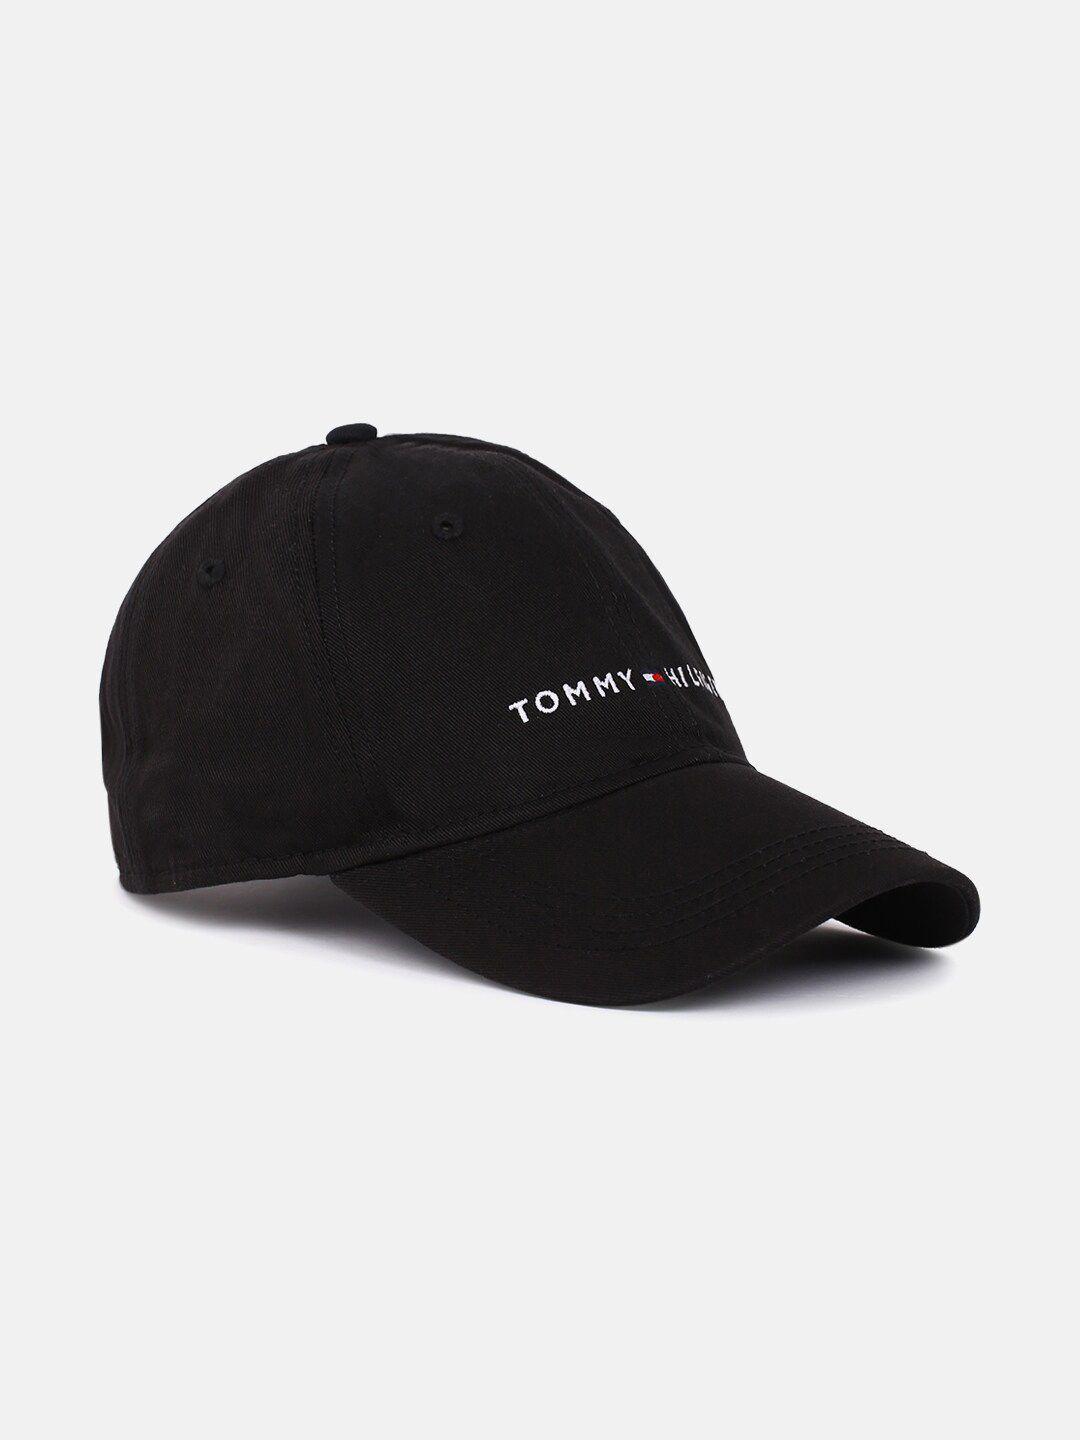 tommy hilfiger men typography embroidered cotton baseball cap